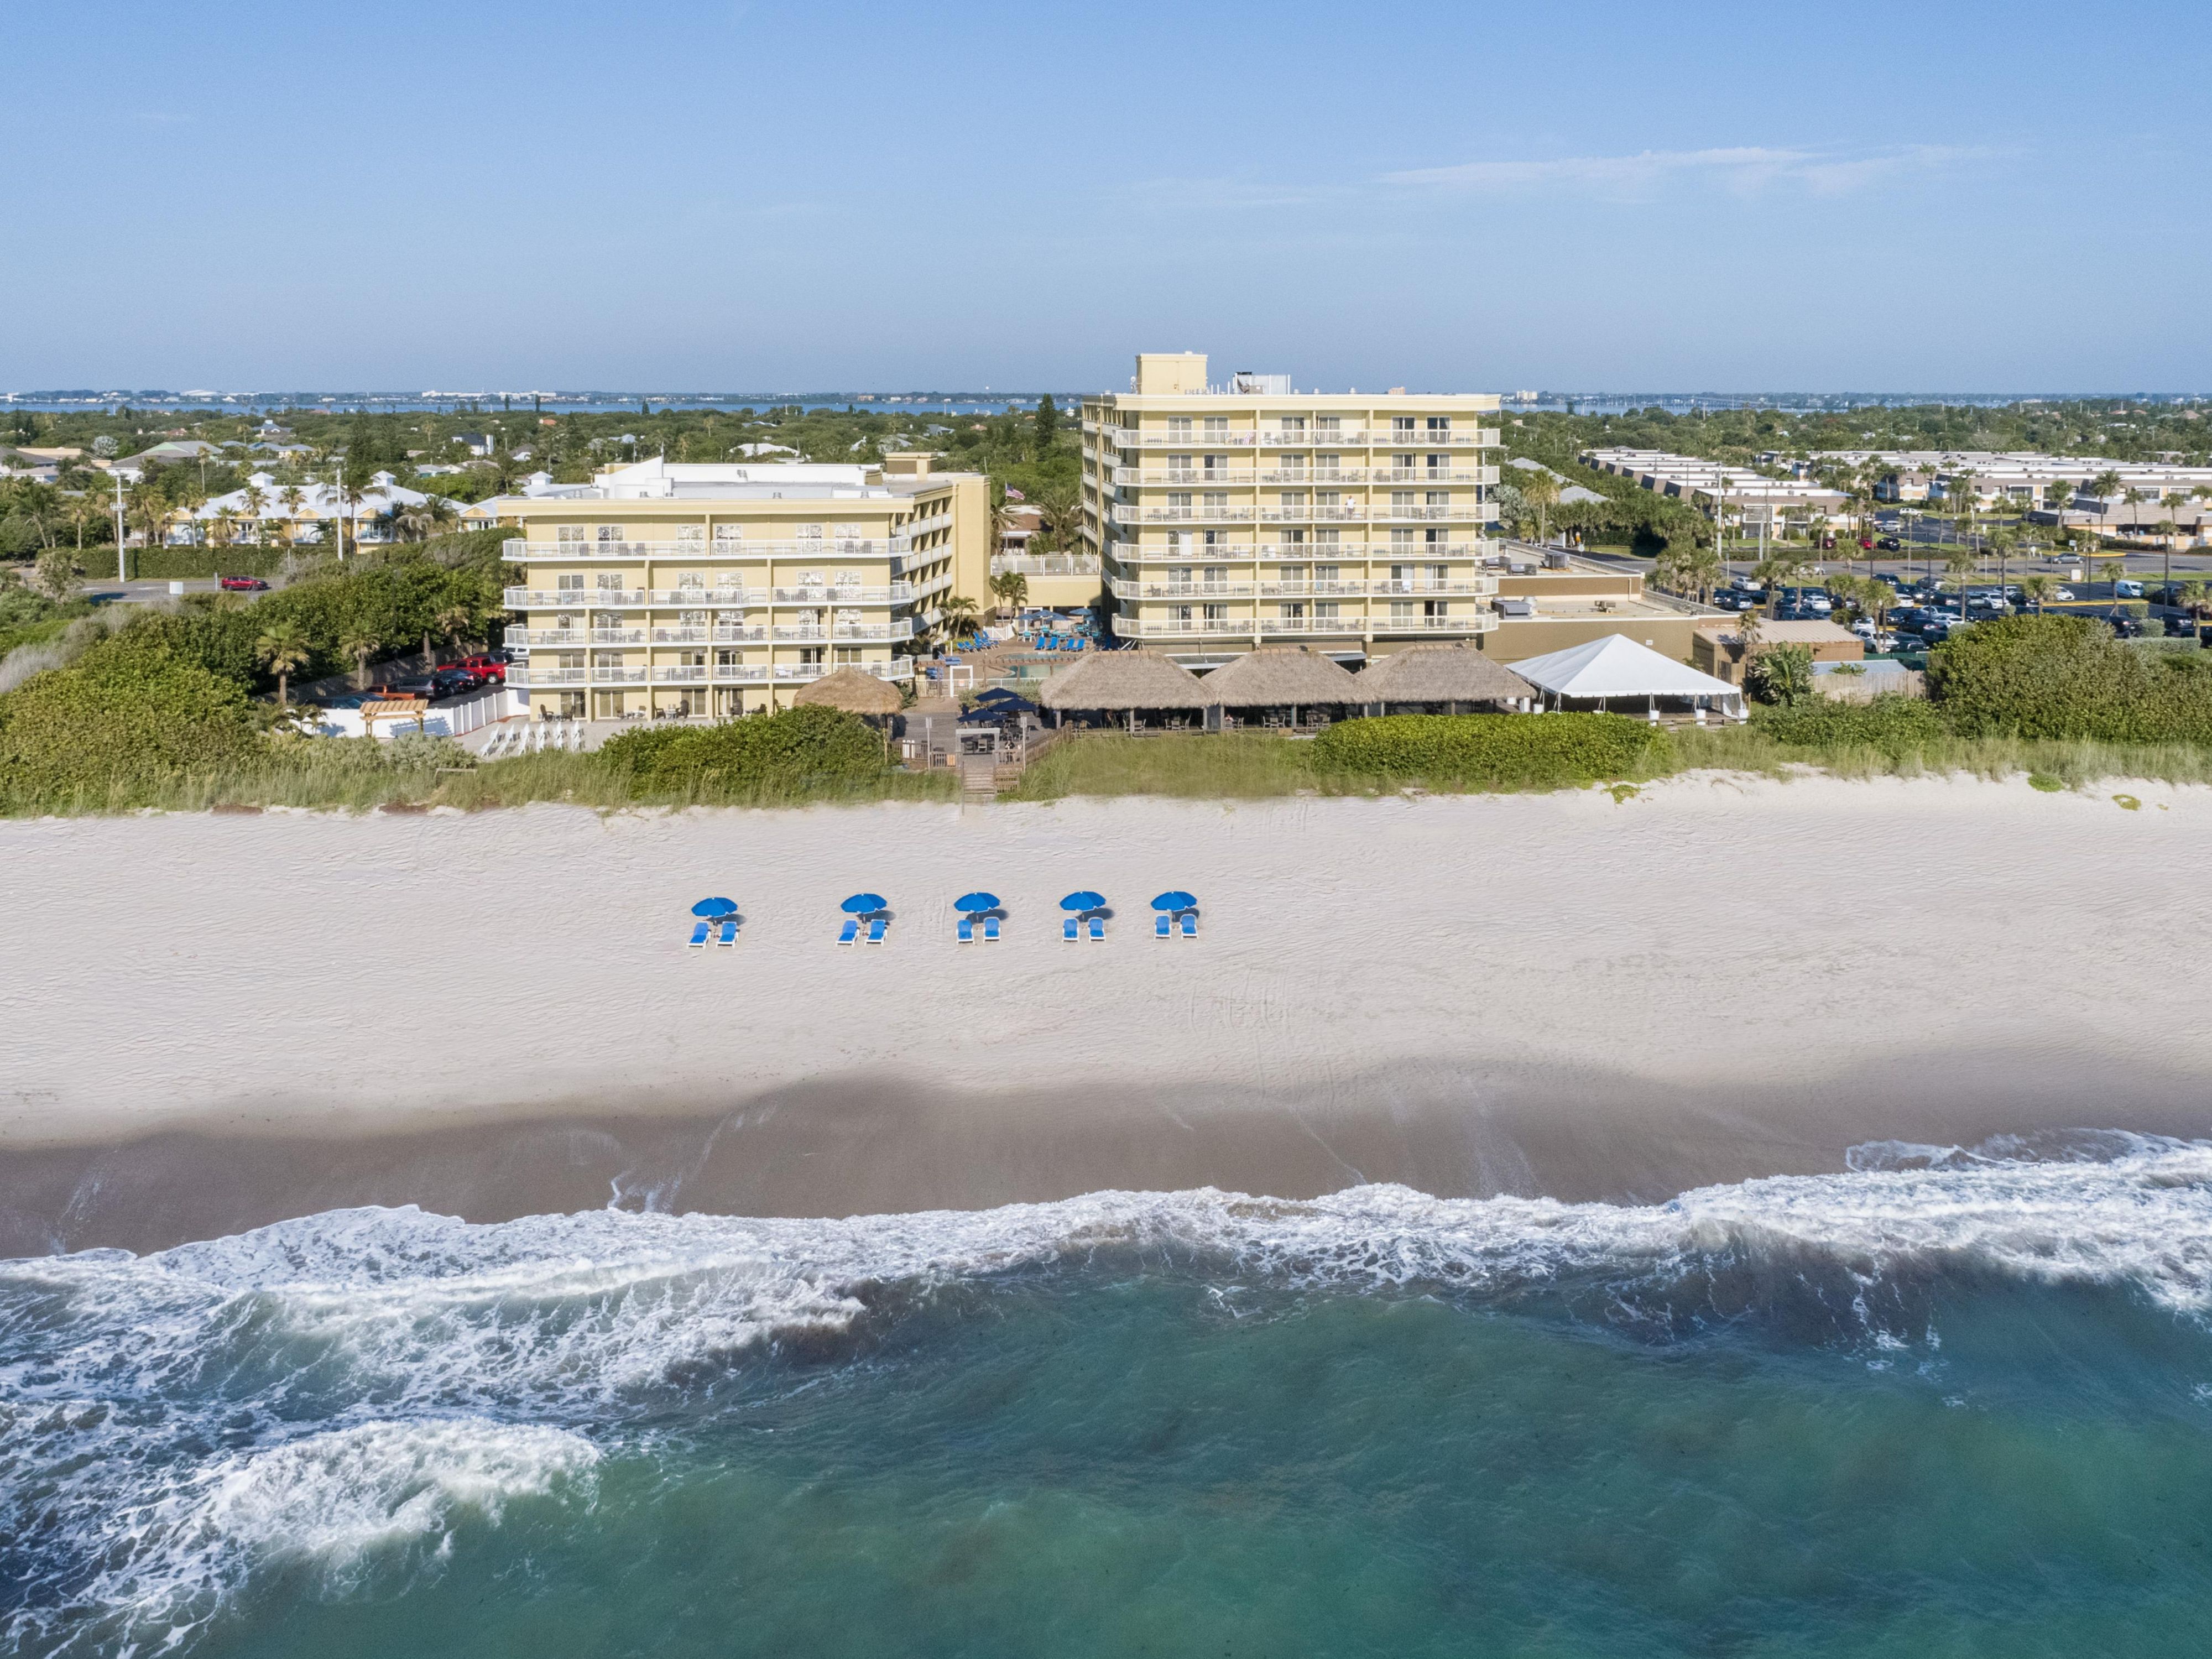 Our sophisticated beachfront hotel is a relaxing oasis, providing guests with well-appointed rooms and fantastic amenities. Each room features plush bedding, a spa-inspired bathroom, and free Wi-Fi. All suites are oceanfront with balconies, allowing you to wake up and instantly greet the Atlantic Ocean, which makes this Melbourne FL hotel unique!
